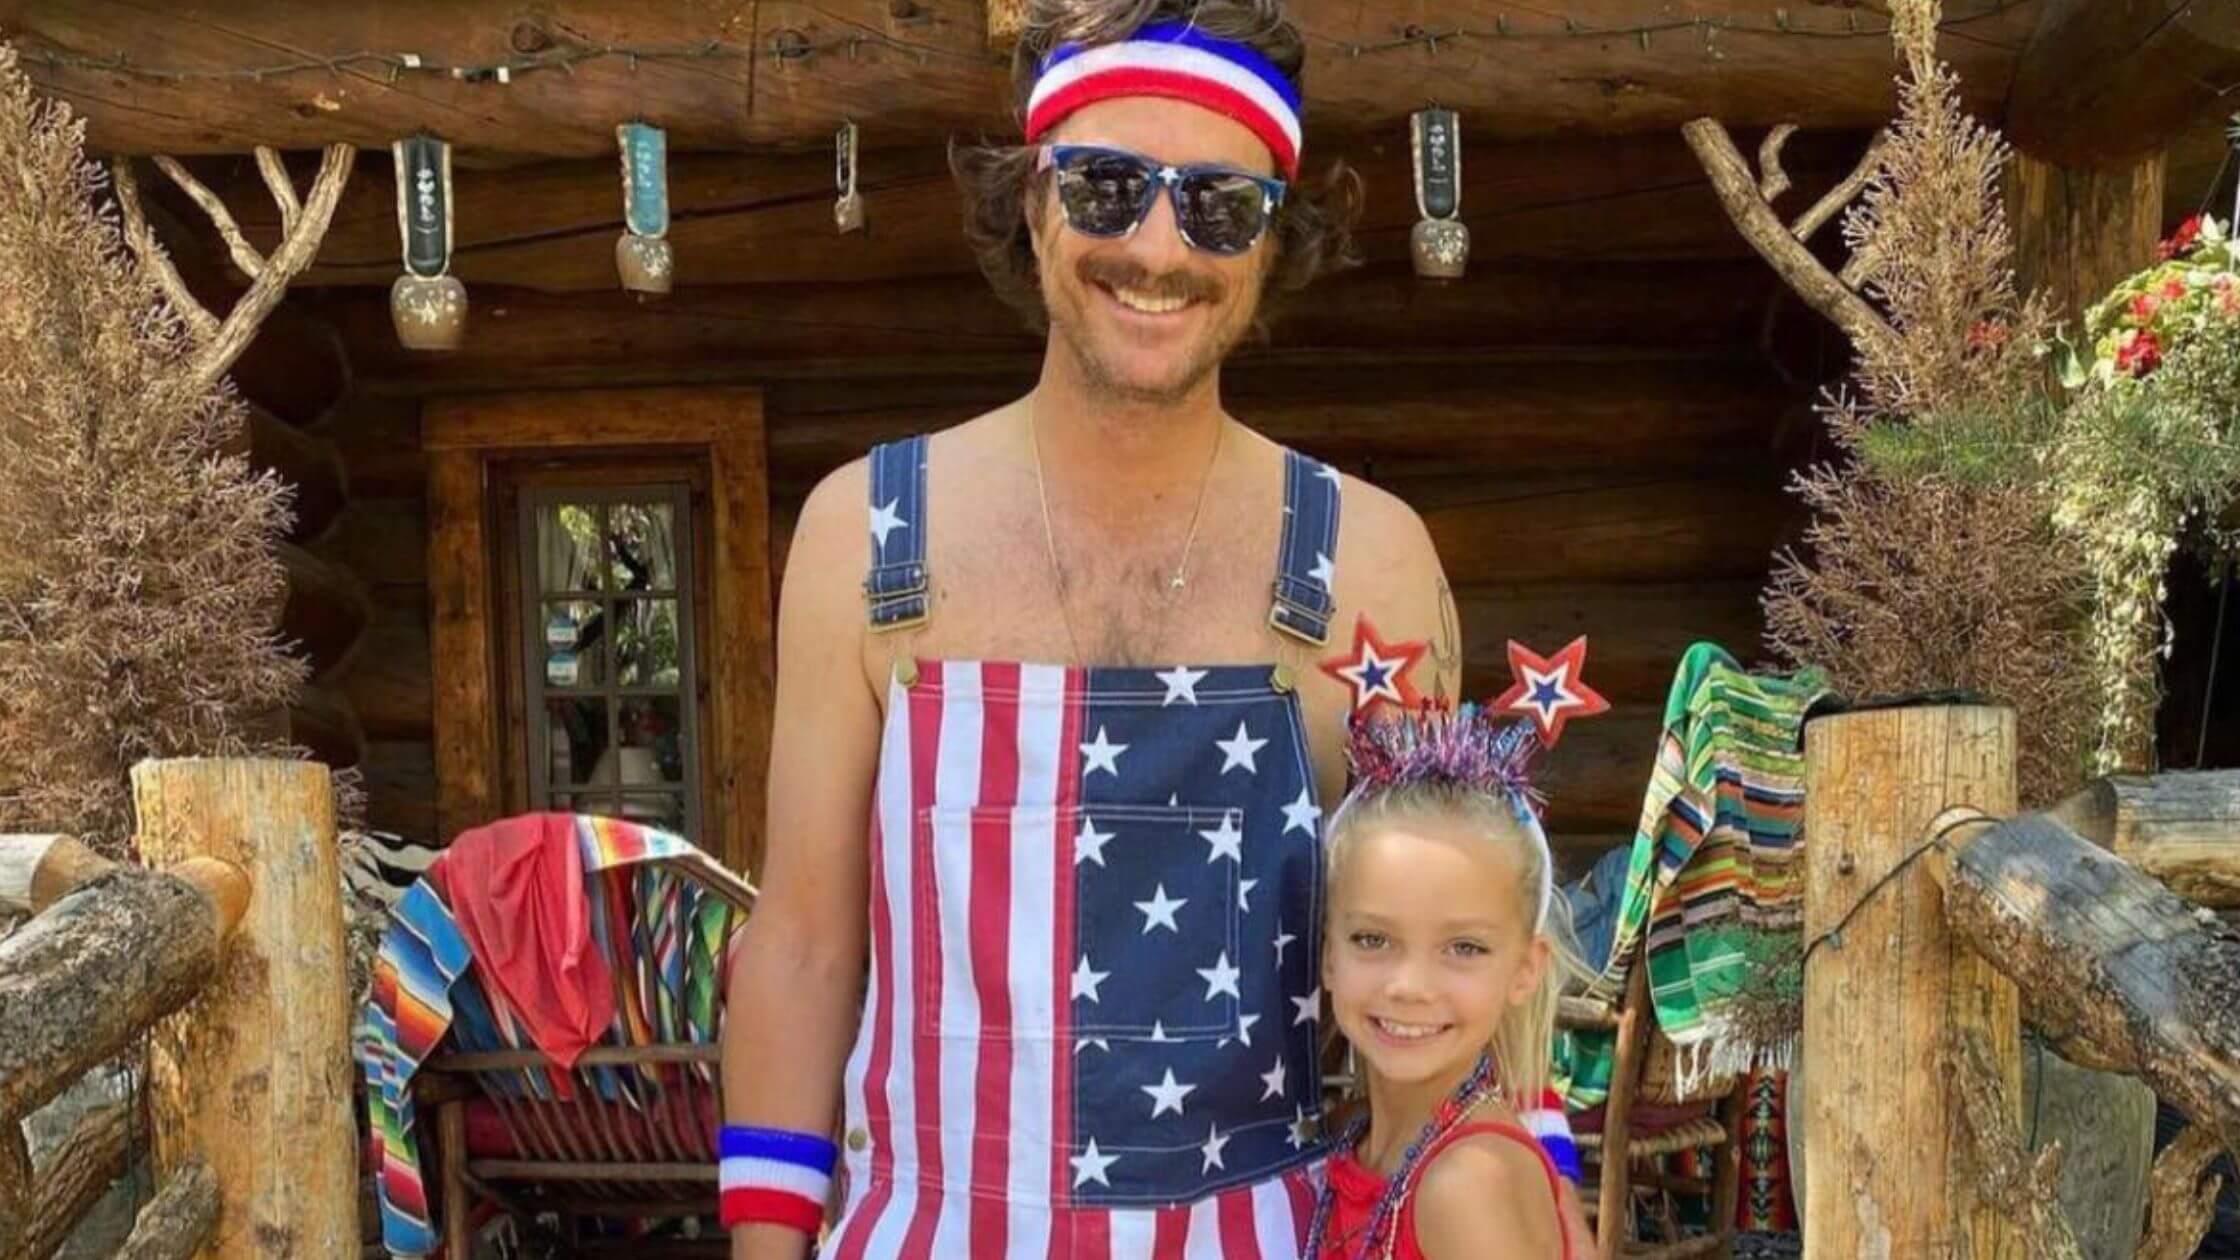 Oliver Hudson Calls His Daughter Rio his "Partner In Fun" In A Sweet 9th Birthday Tribute